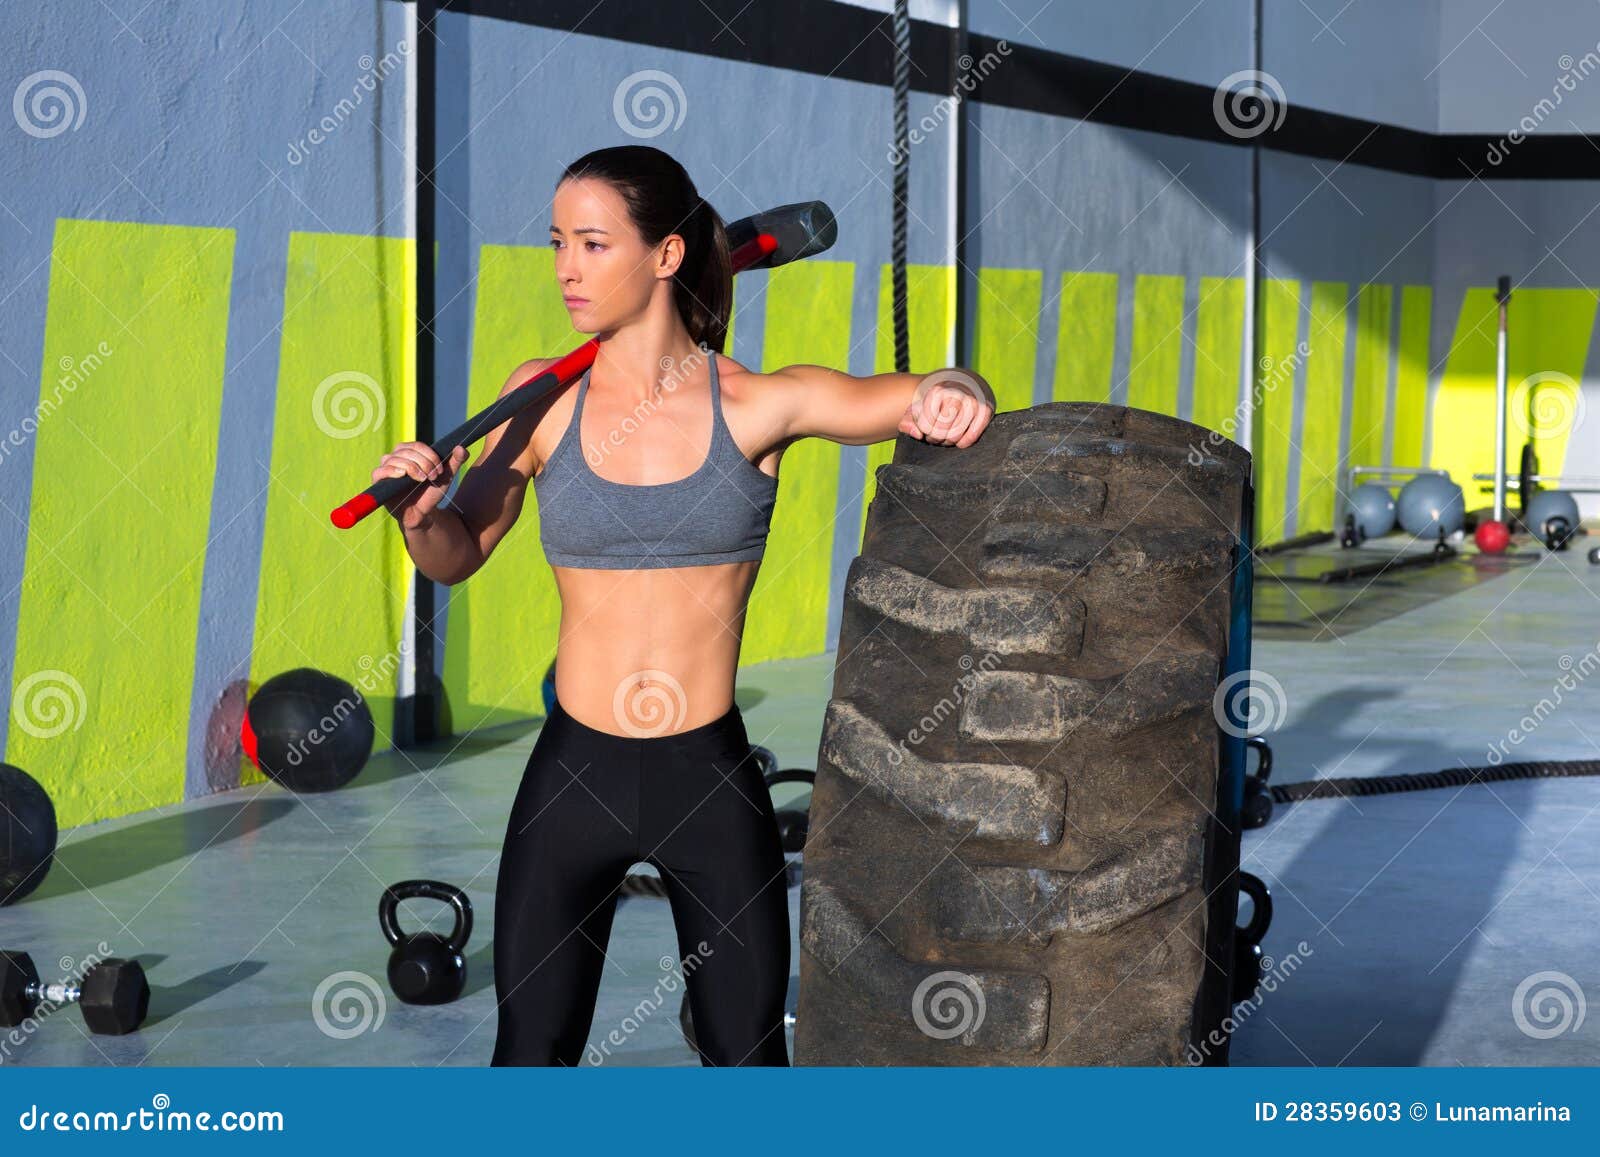 crossfit sledge hammer woman at gym relaxed